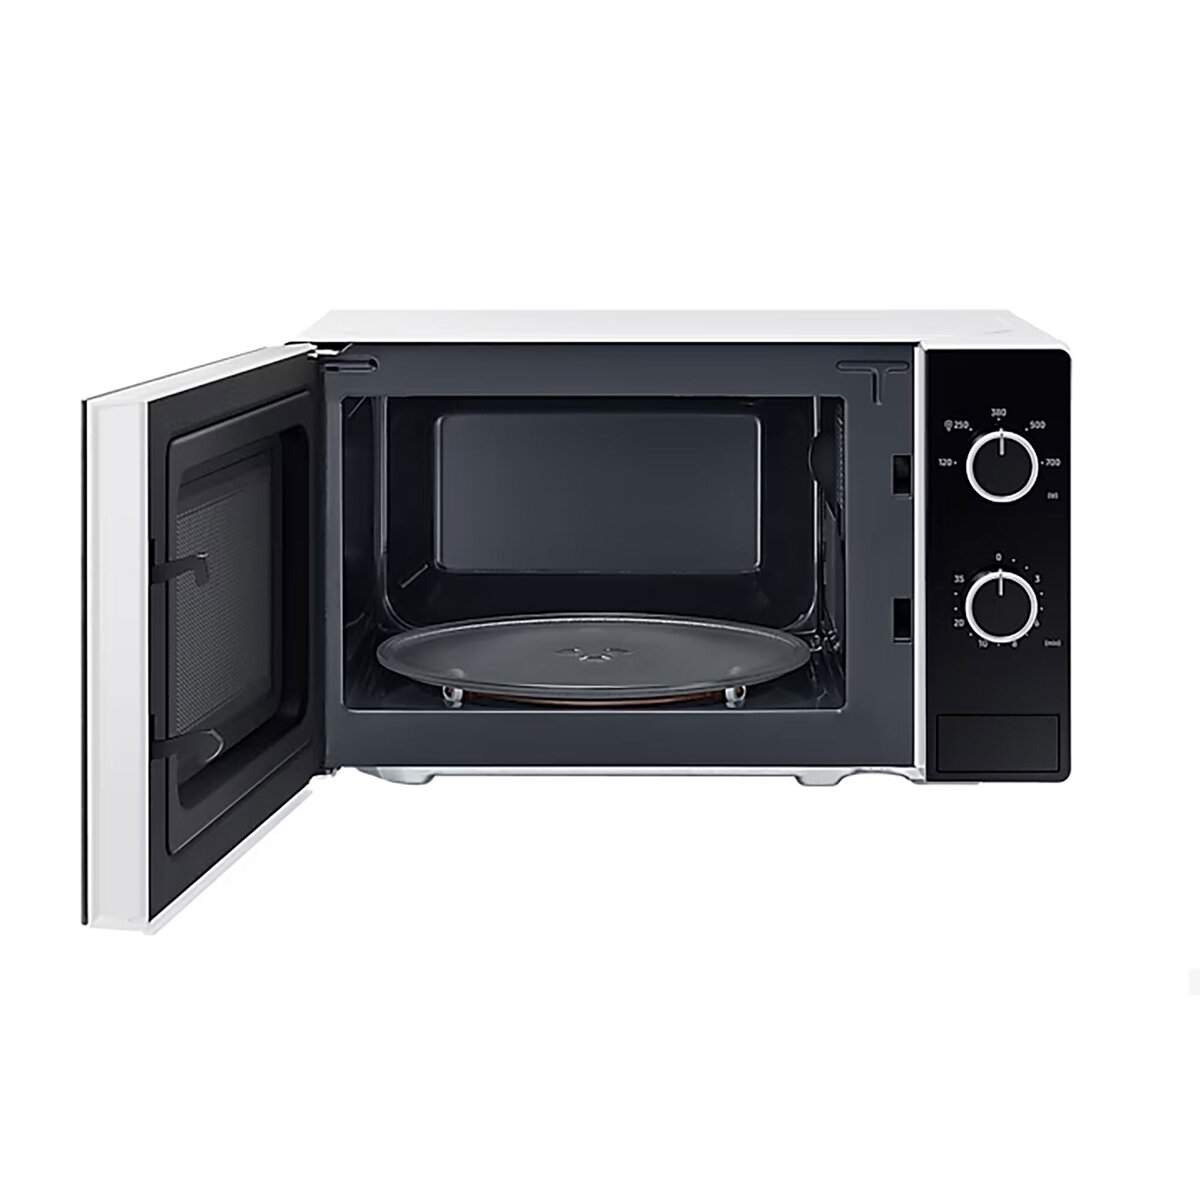 Samsung Microwave Oven, 20 L Capacity, Black&White, MS20A3010AH/SG